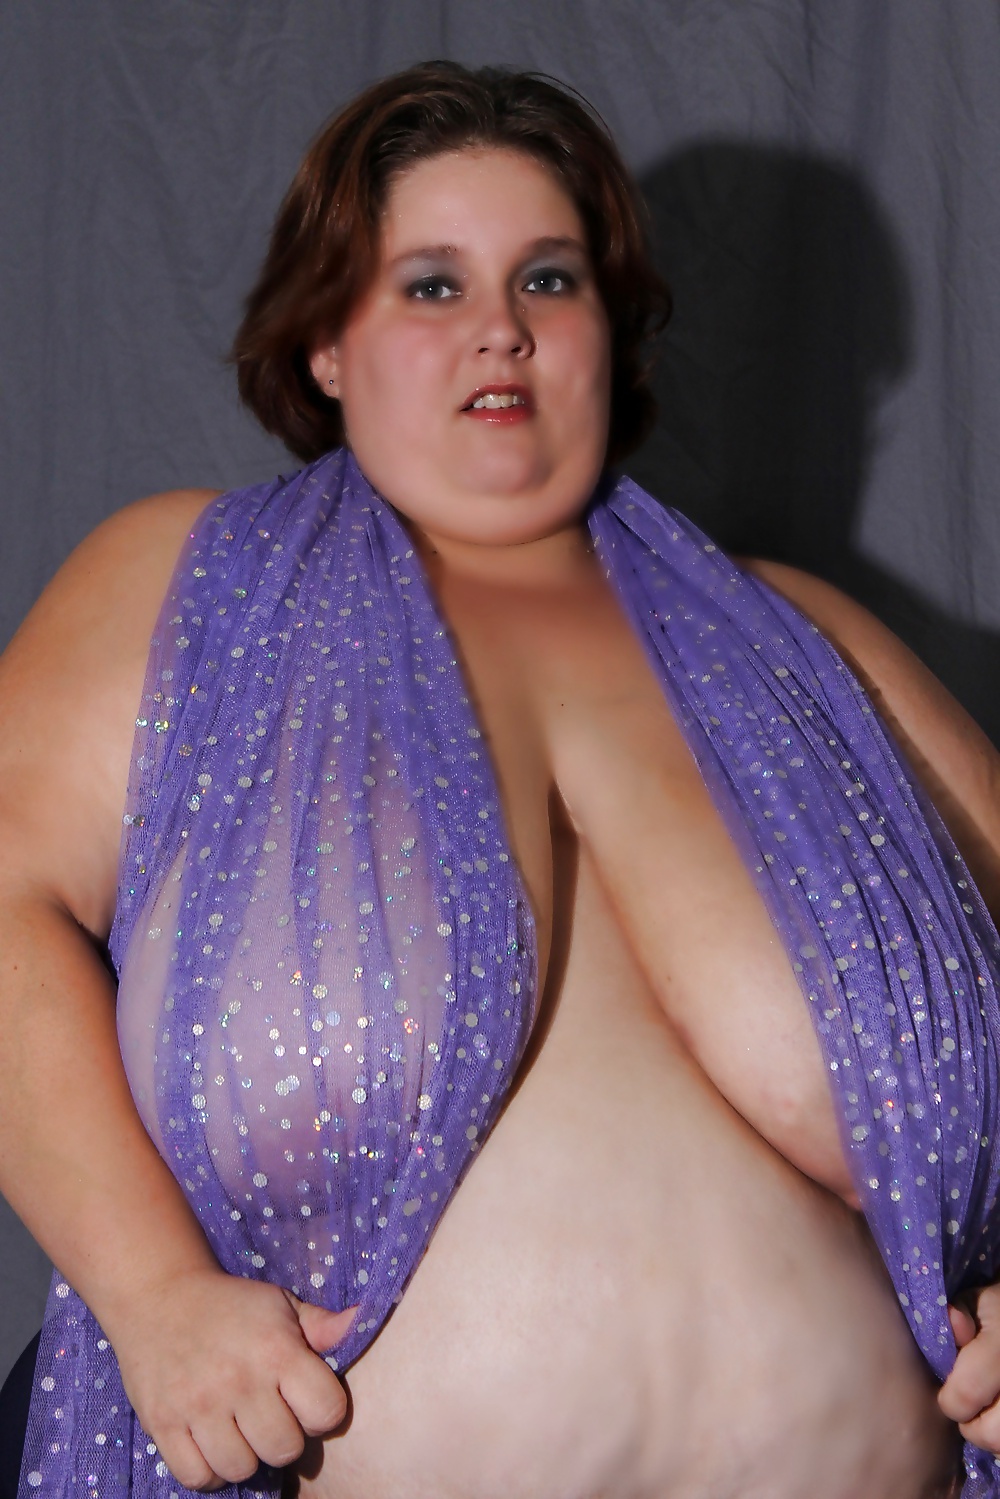 More of this sweet ssbbw #25437448